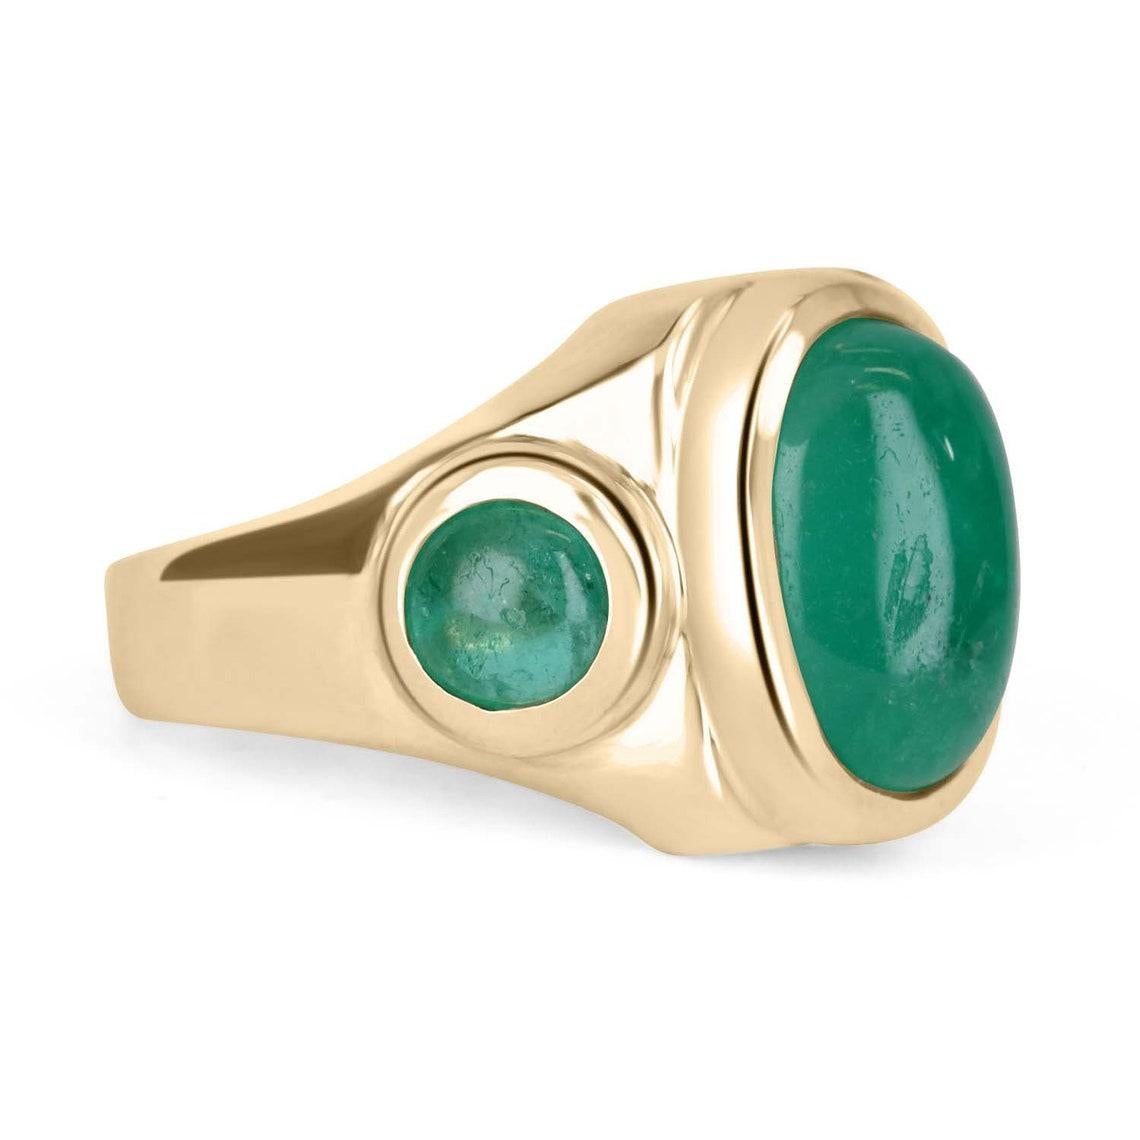 This men's 14K earth mined cabochon emerald three stone solid gold solitaire ring says it all. This ring is completely handmade and designed with genuine materials from our emerald collection. The cabochon gemstones are natural and come directly